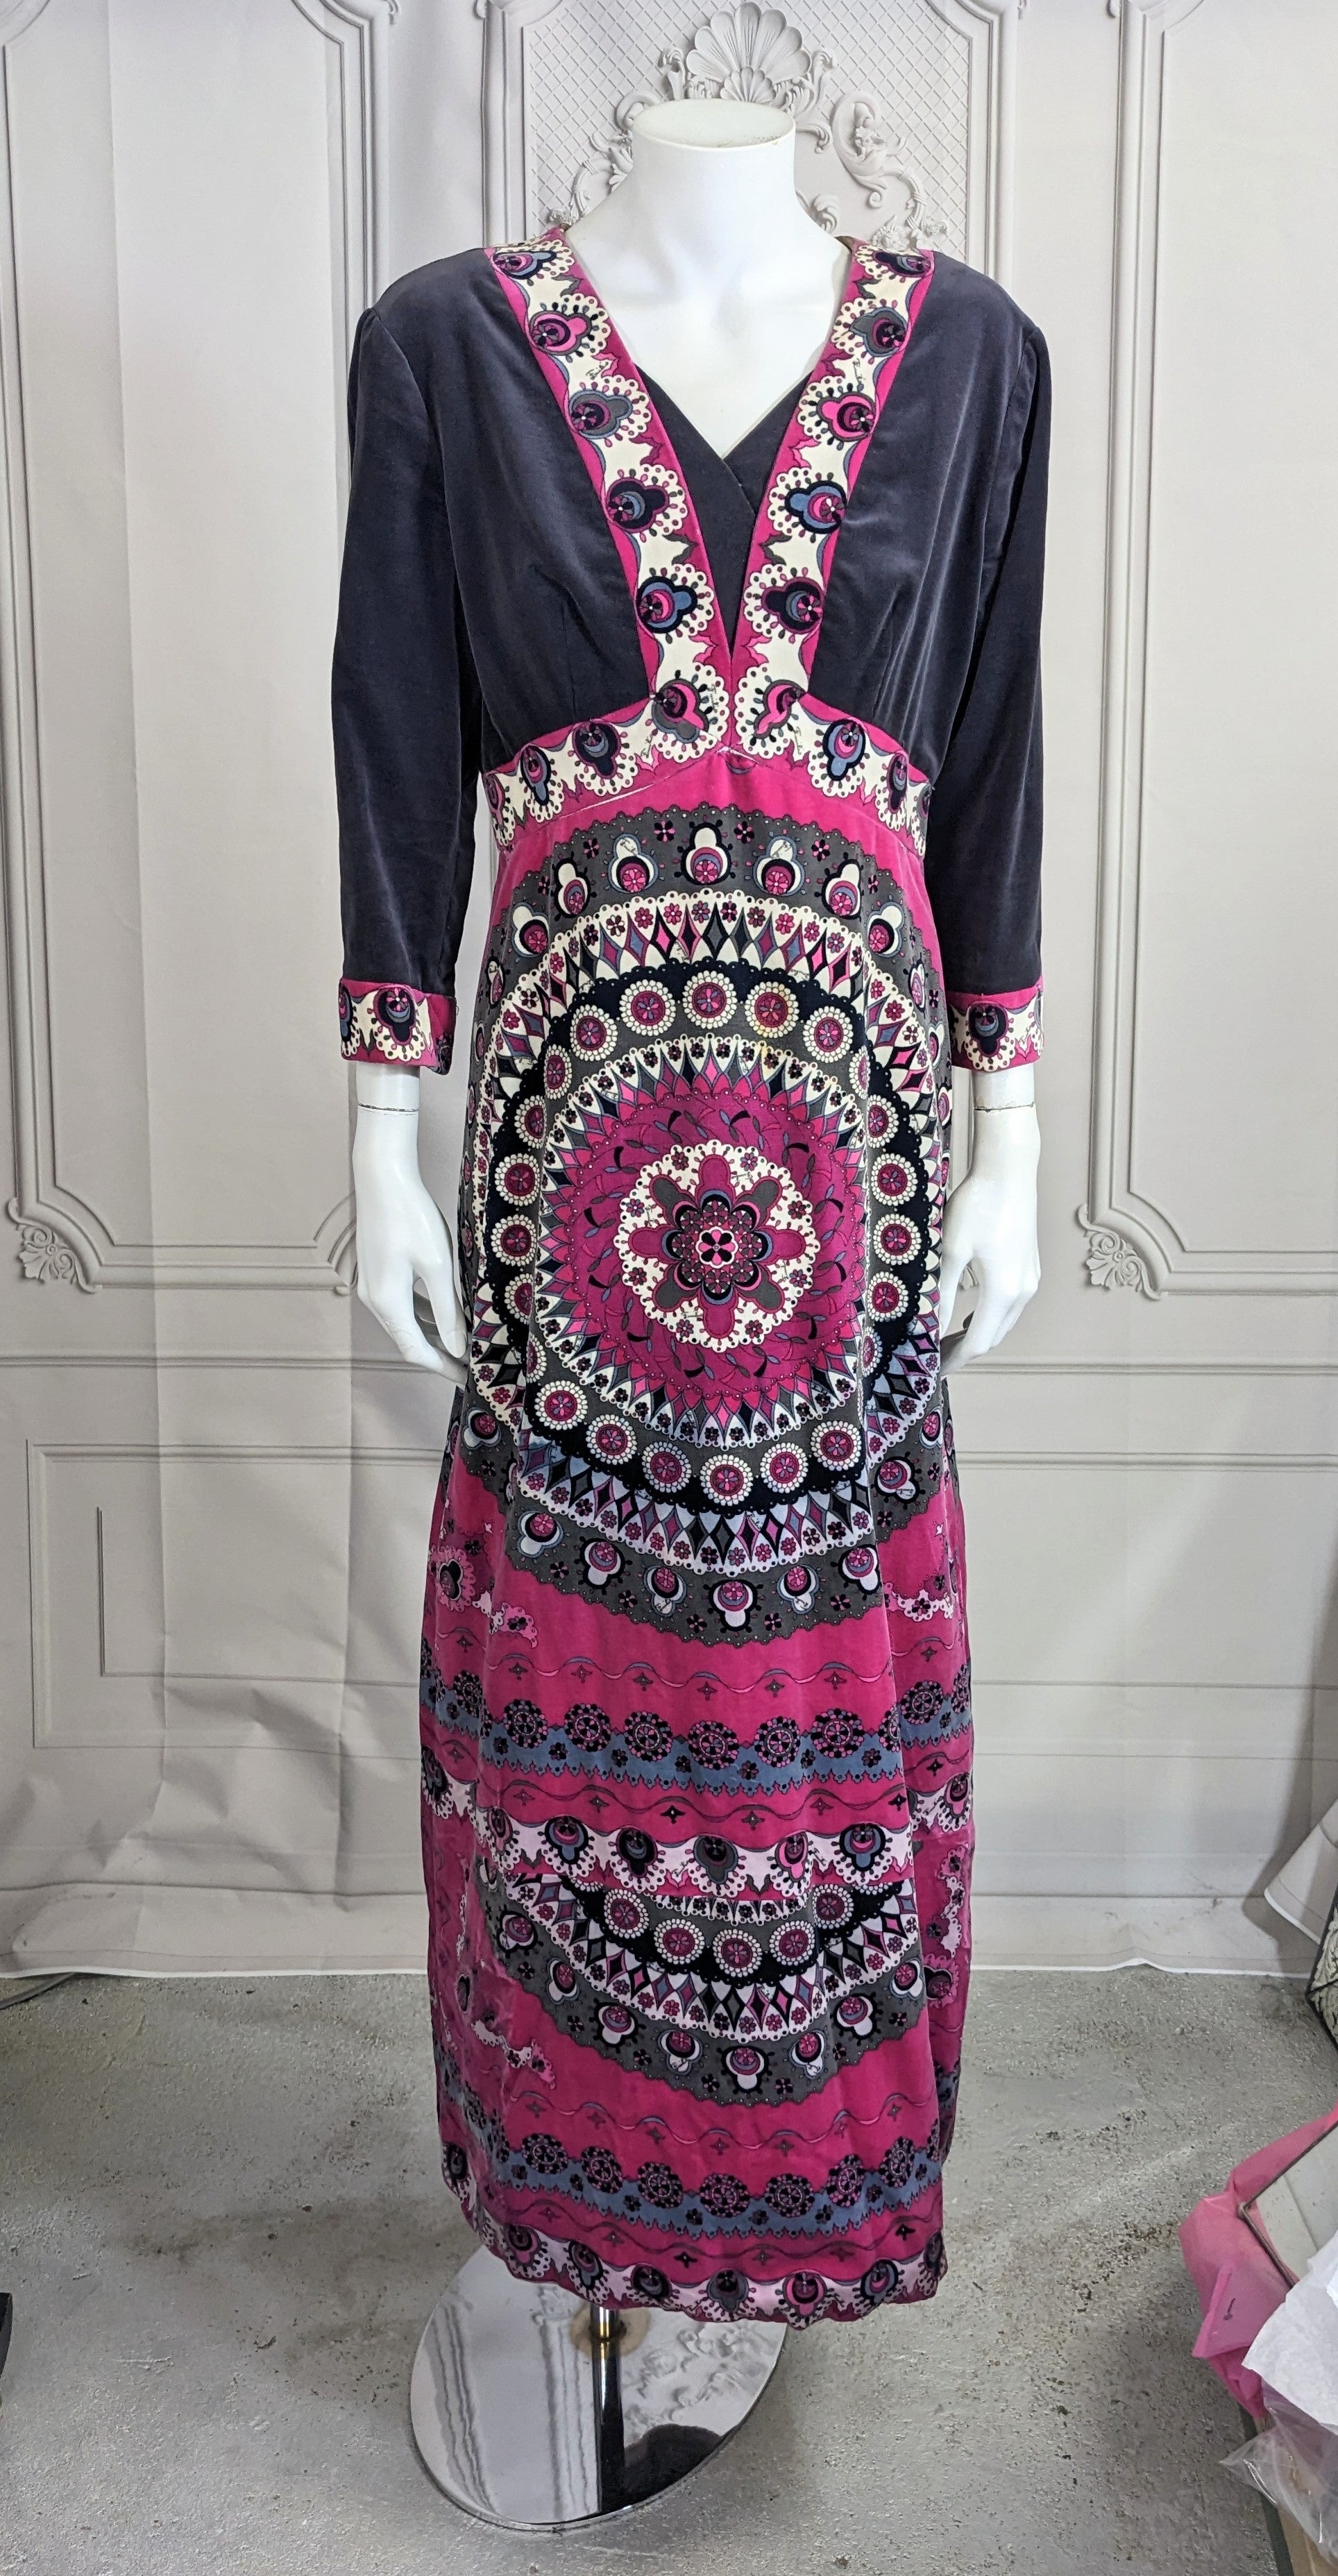 Elegant Emilio Pucci Graphic Velvet Gown from the 1970's. Placed print in cotton velvet on a fully silk lined A line maxi dress. 
Faux wrap Empire line with full A line skirt falling below and 3/4 sleeves. There are 2 gray period velvet modesty